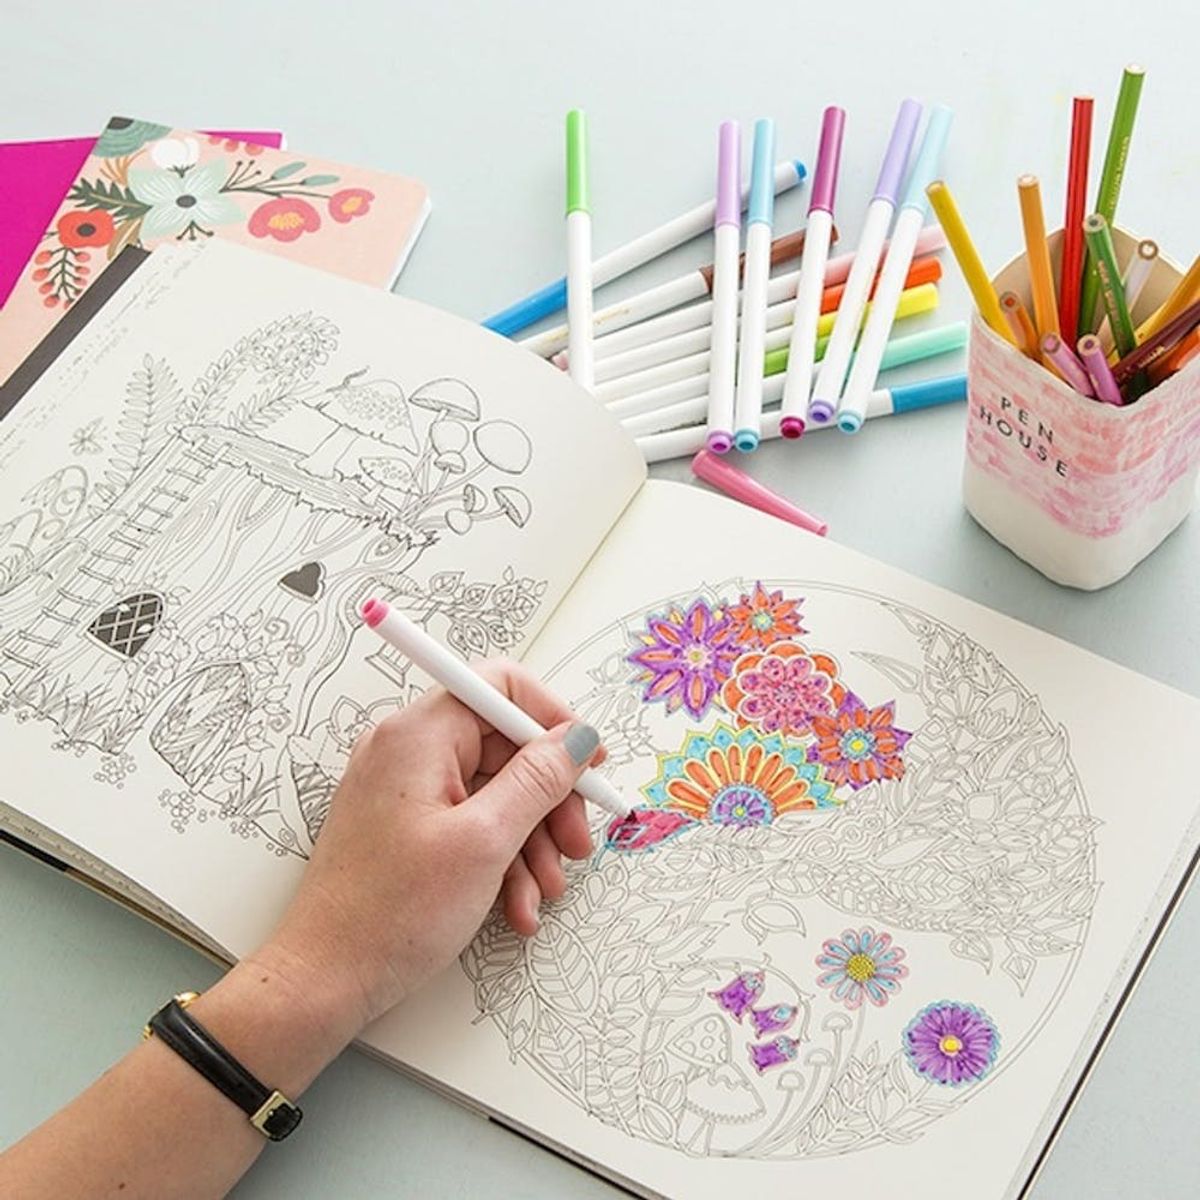 5 Free Coloring Printables Because Coloring Is the New Meditation